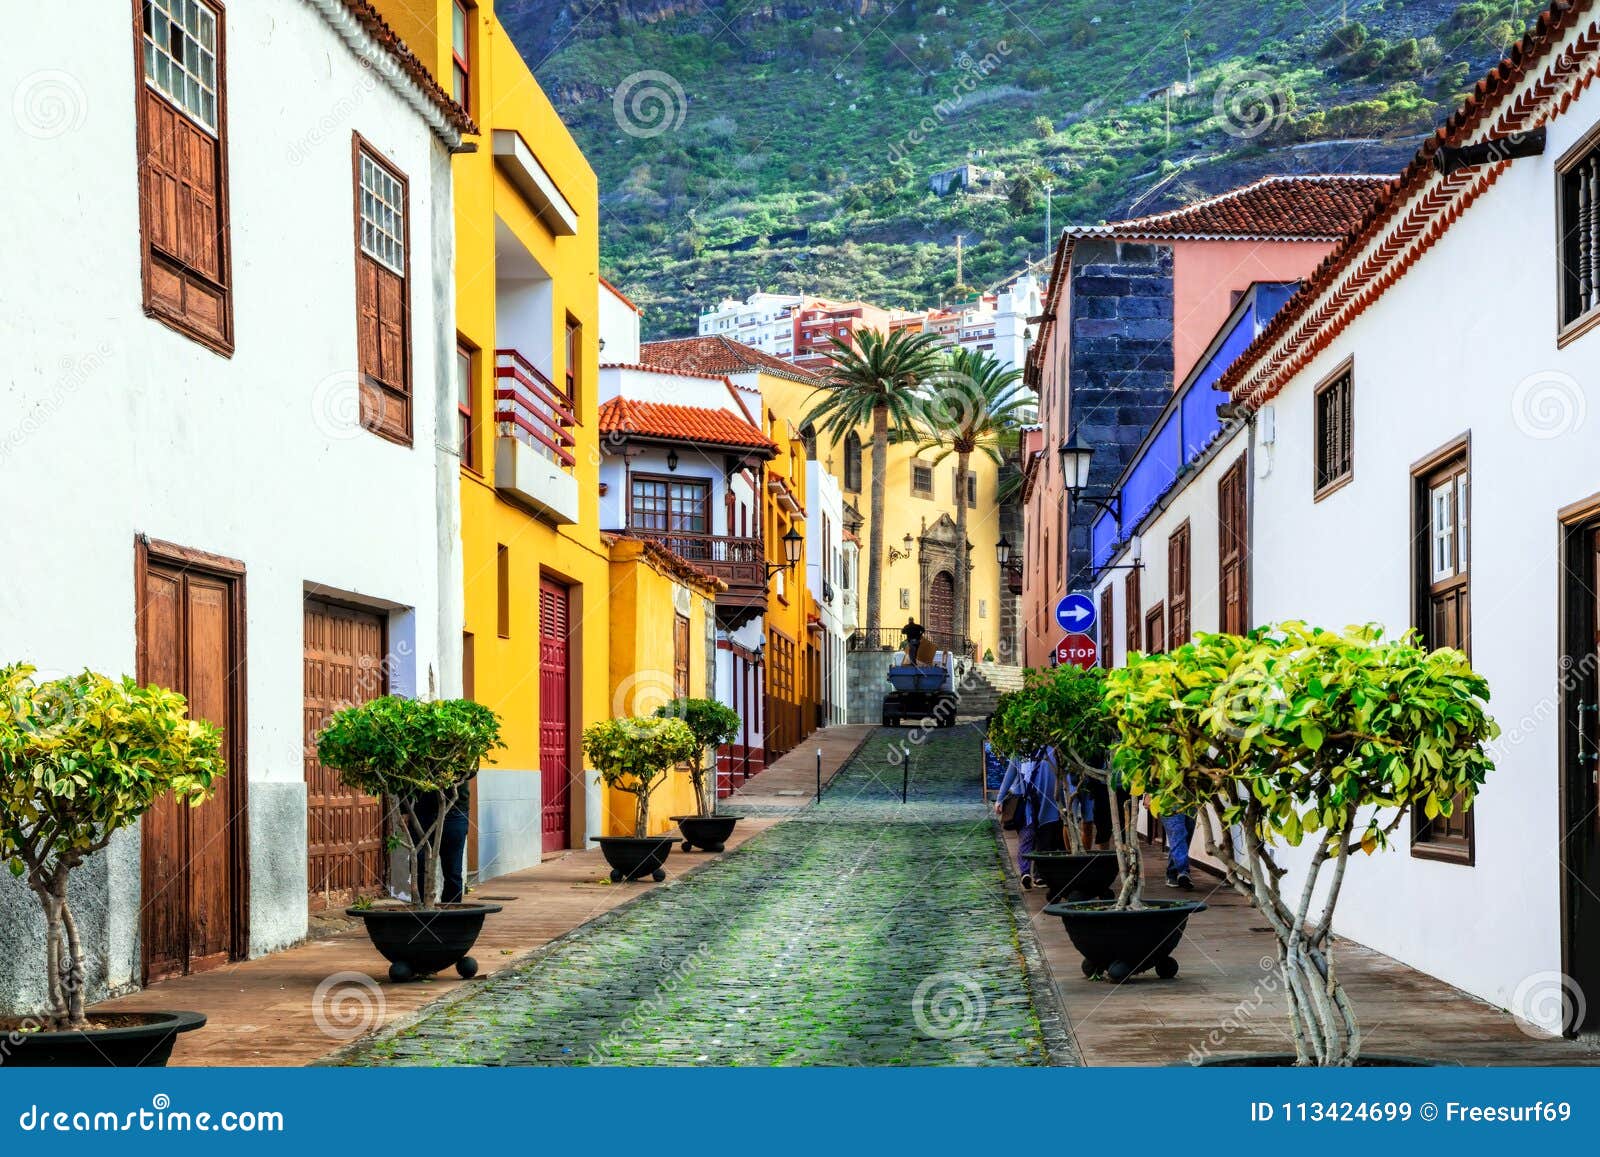 charming colorful streets of old colonial town garachico in tener